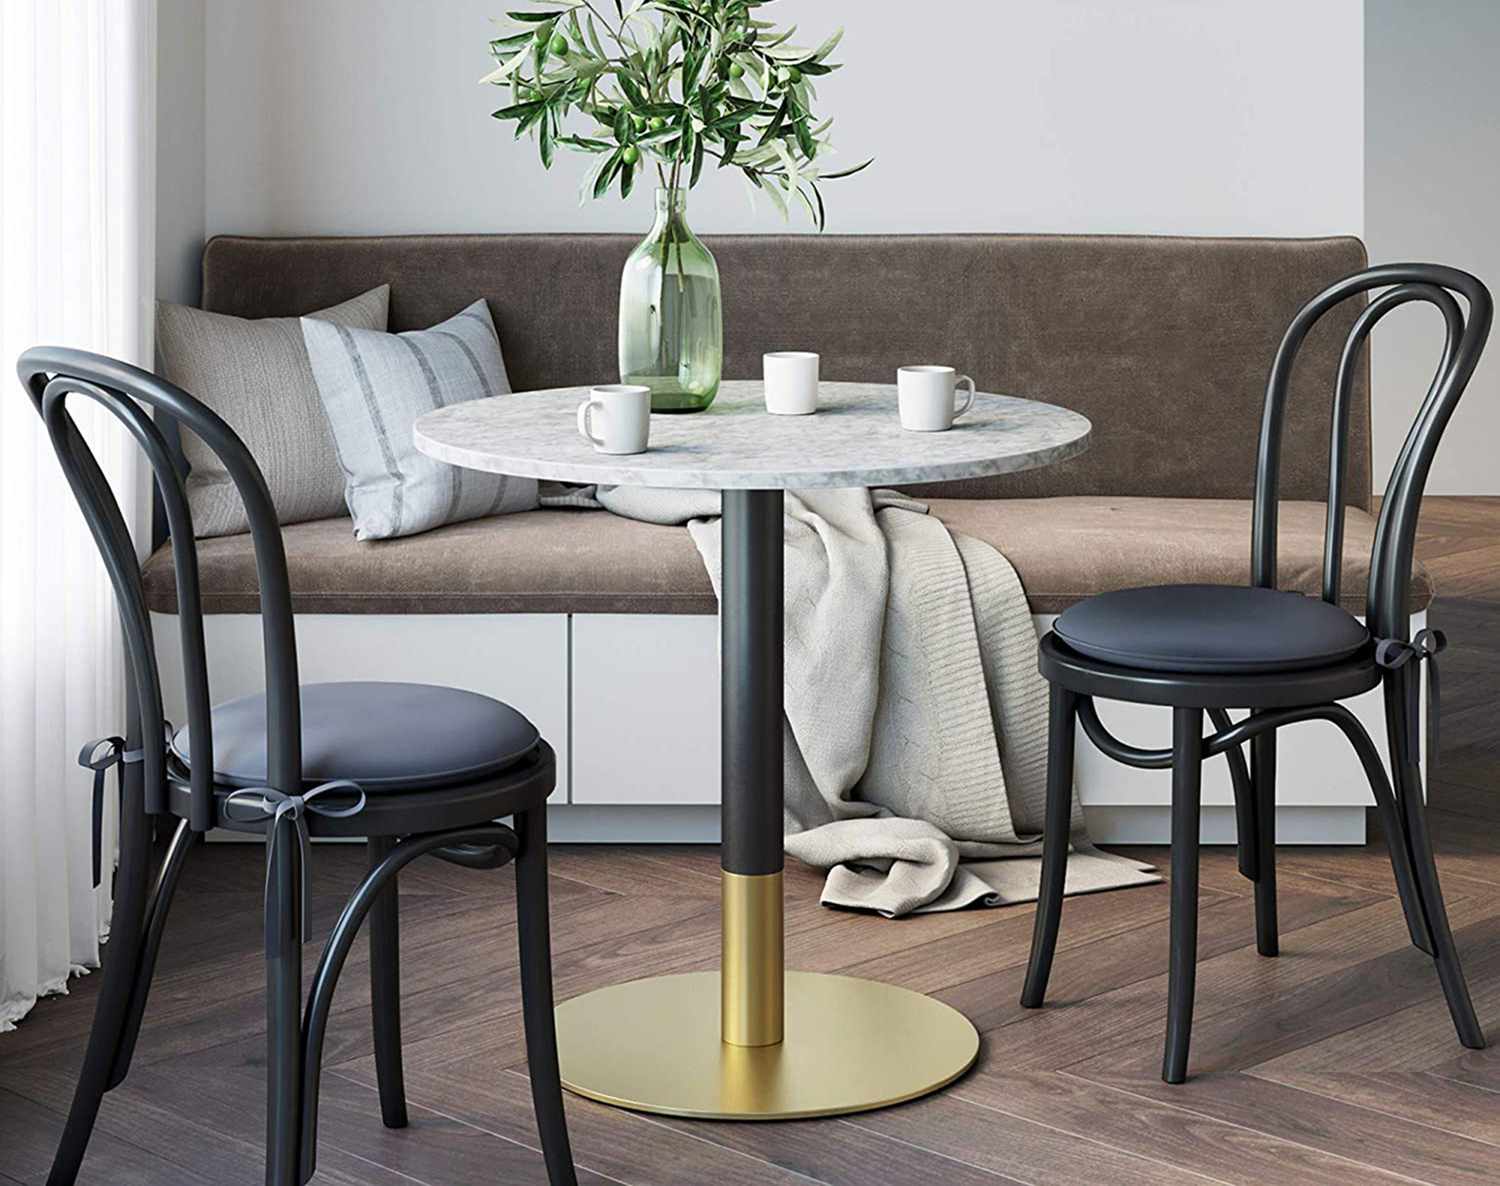 8 Best Dining Tables For Small Spaces, Are Round Dining Tables Better For Small Spaces